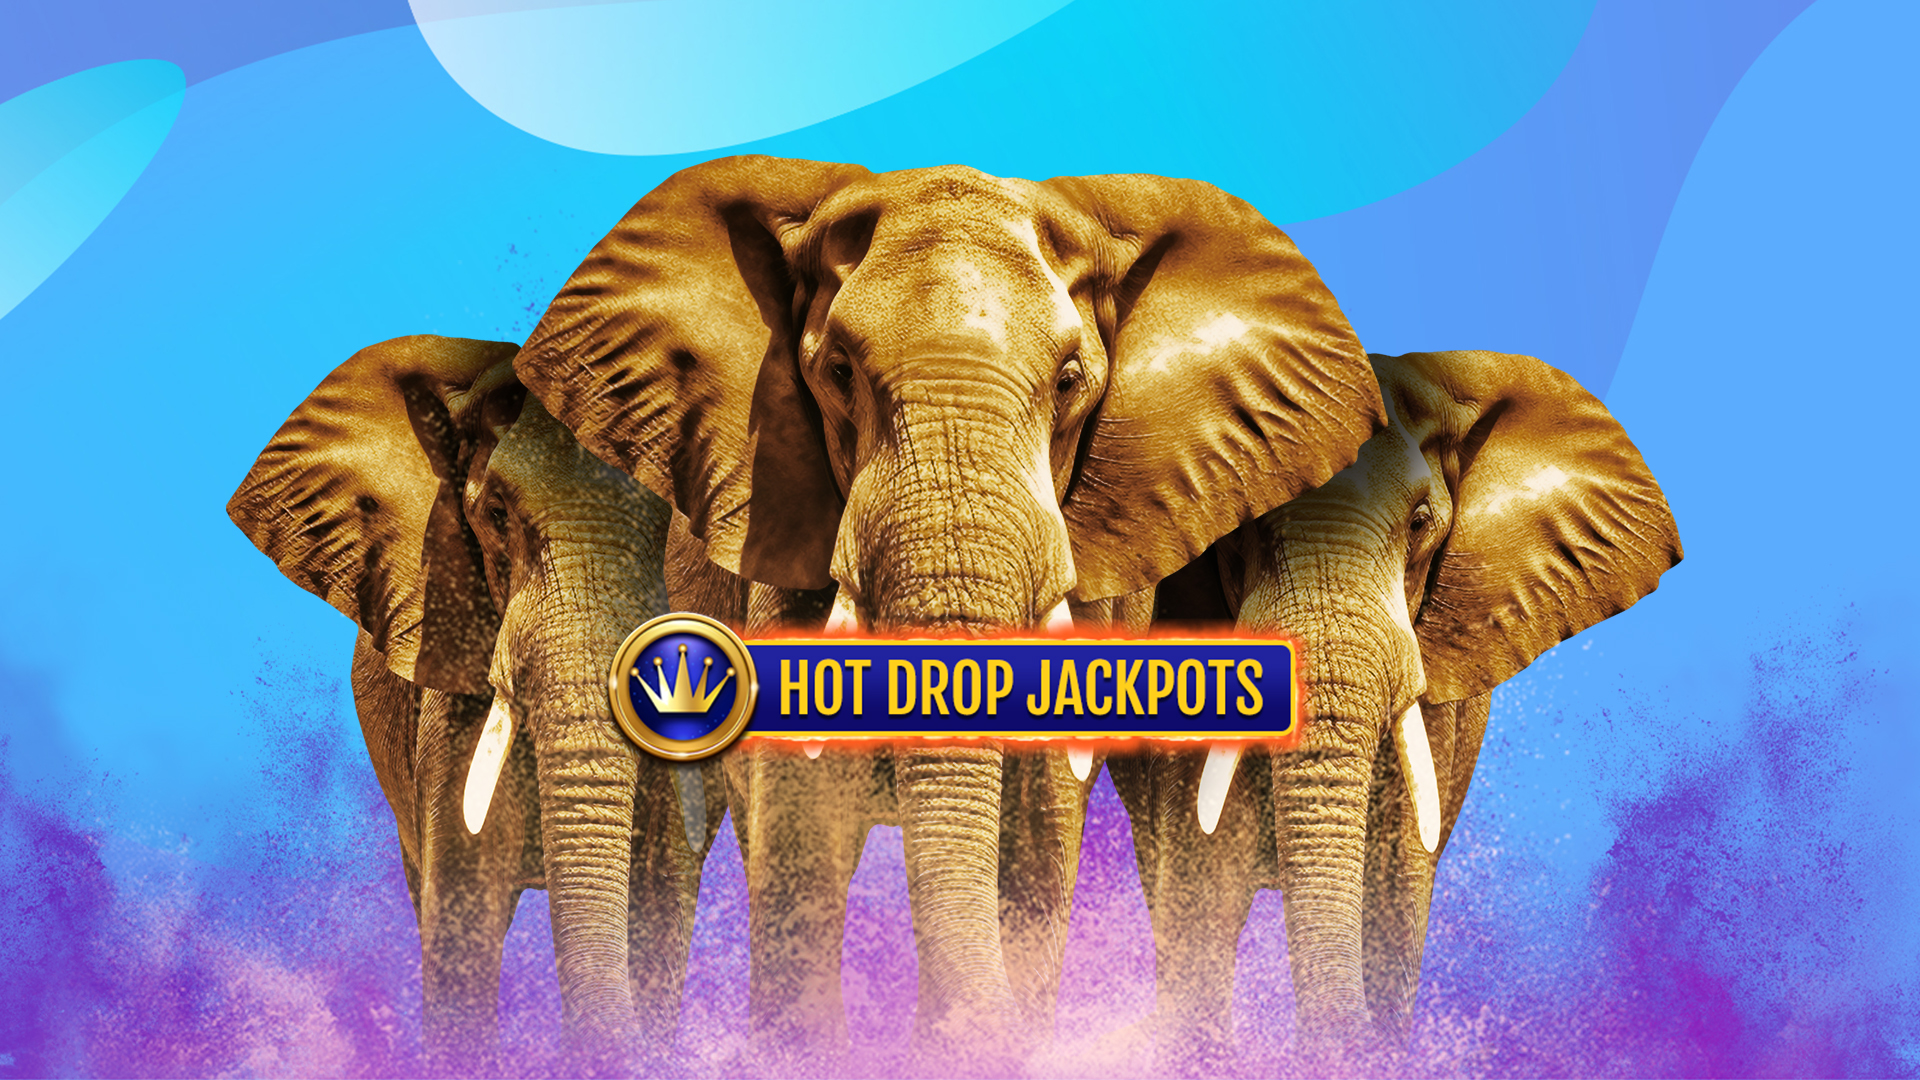 Three 3D-illustrated elephants stand close to each other, staring front on. Across them, is the SlotsLV Hot Drop Jackpots logo - a blue circle with a gold crown, with a rectangular frame that’s on fire with the words “Hot Drop Jackpots” within. Behind is a multi-tone blue abstract background.